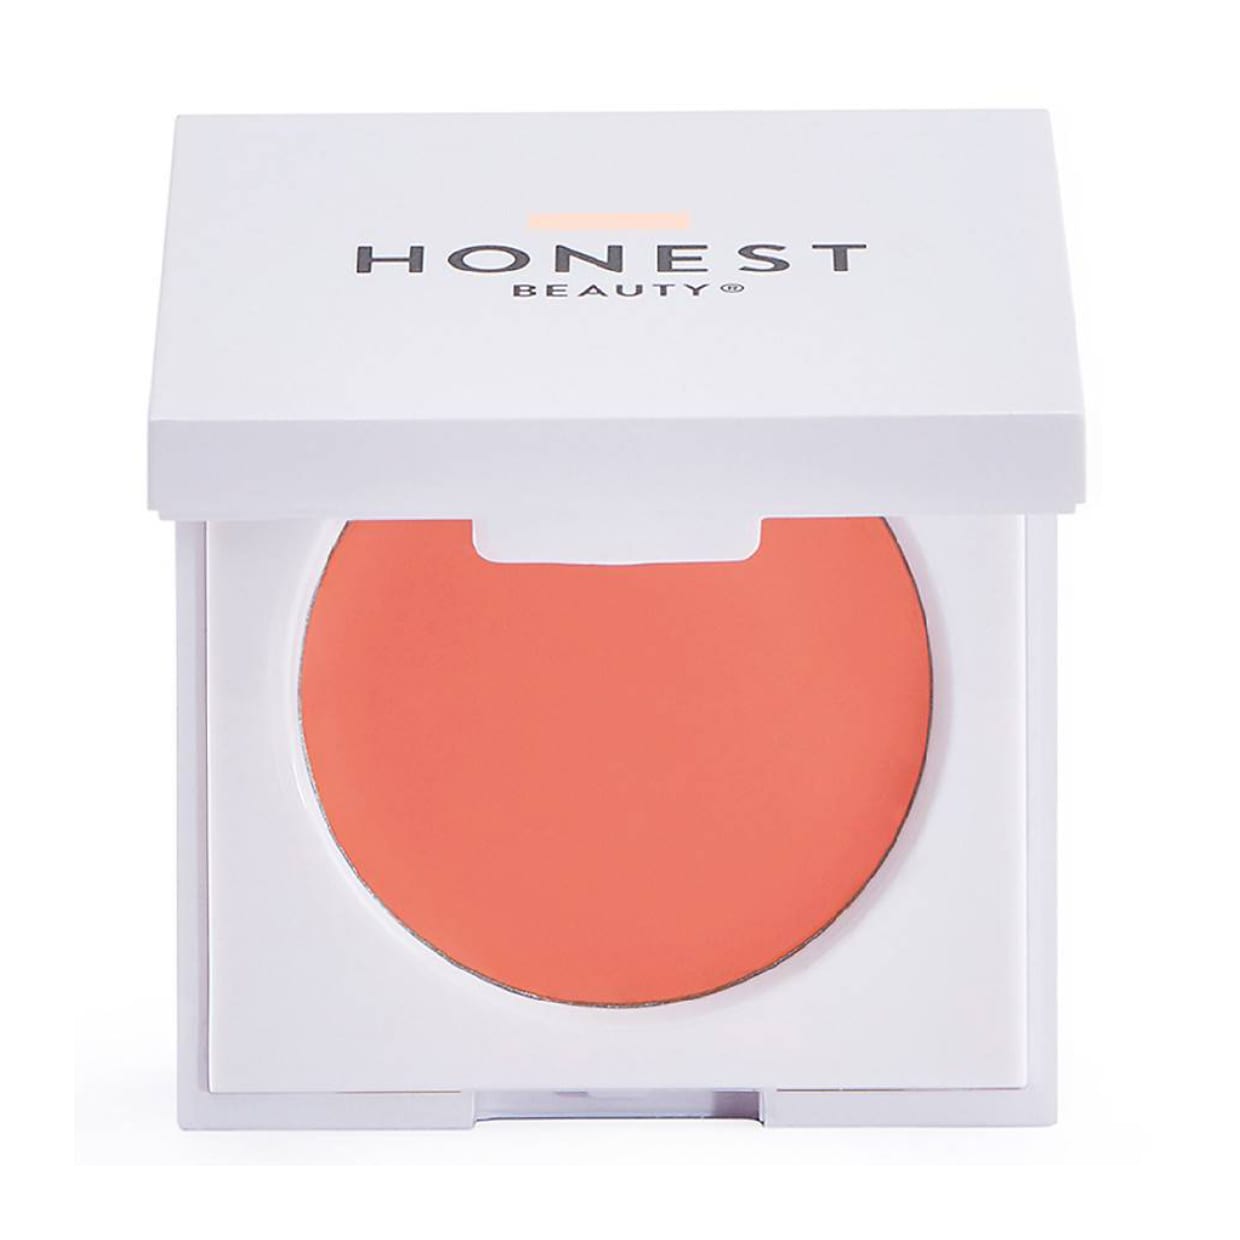 A square compact of blush.